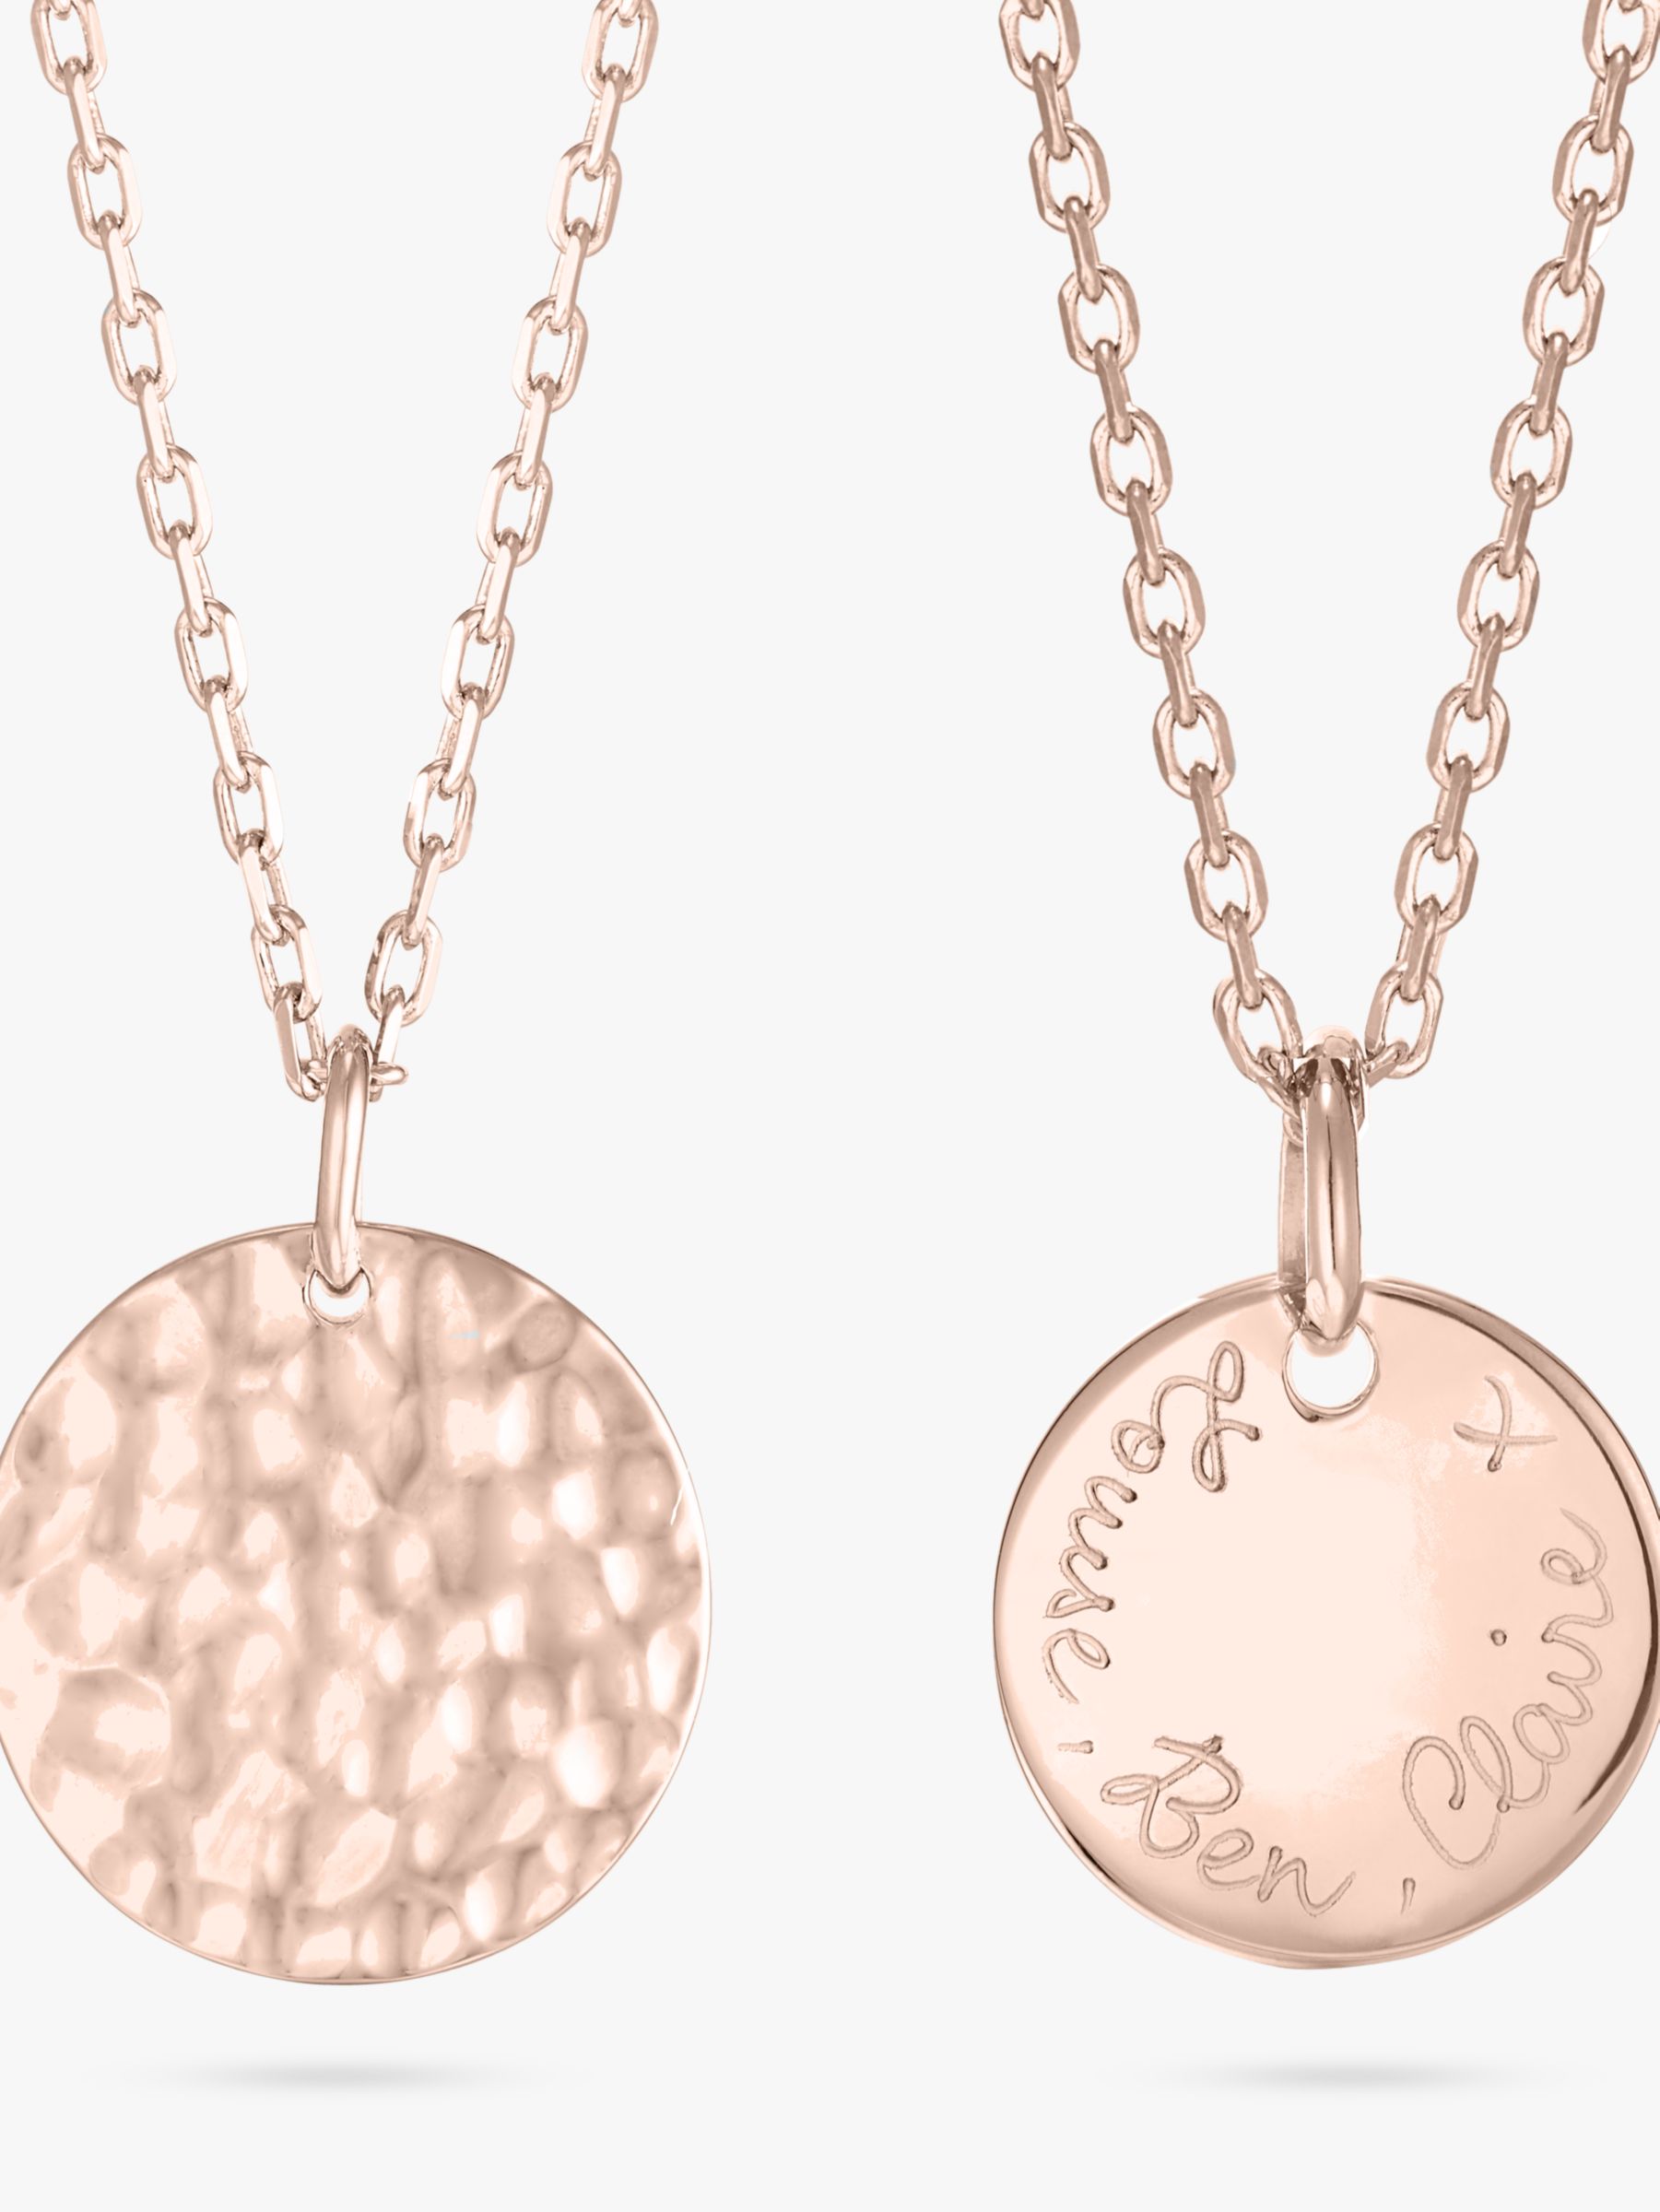 Merci Maman Personalised Small Hammered Pendant Necklace, Rose Gold